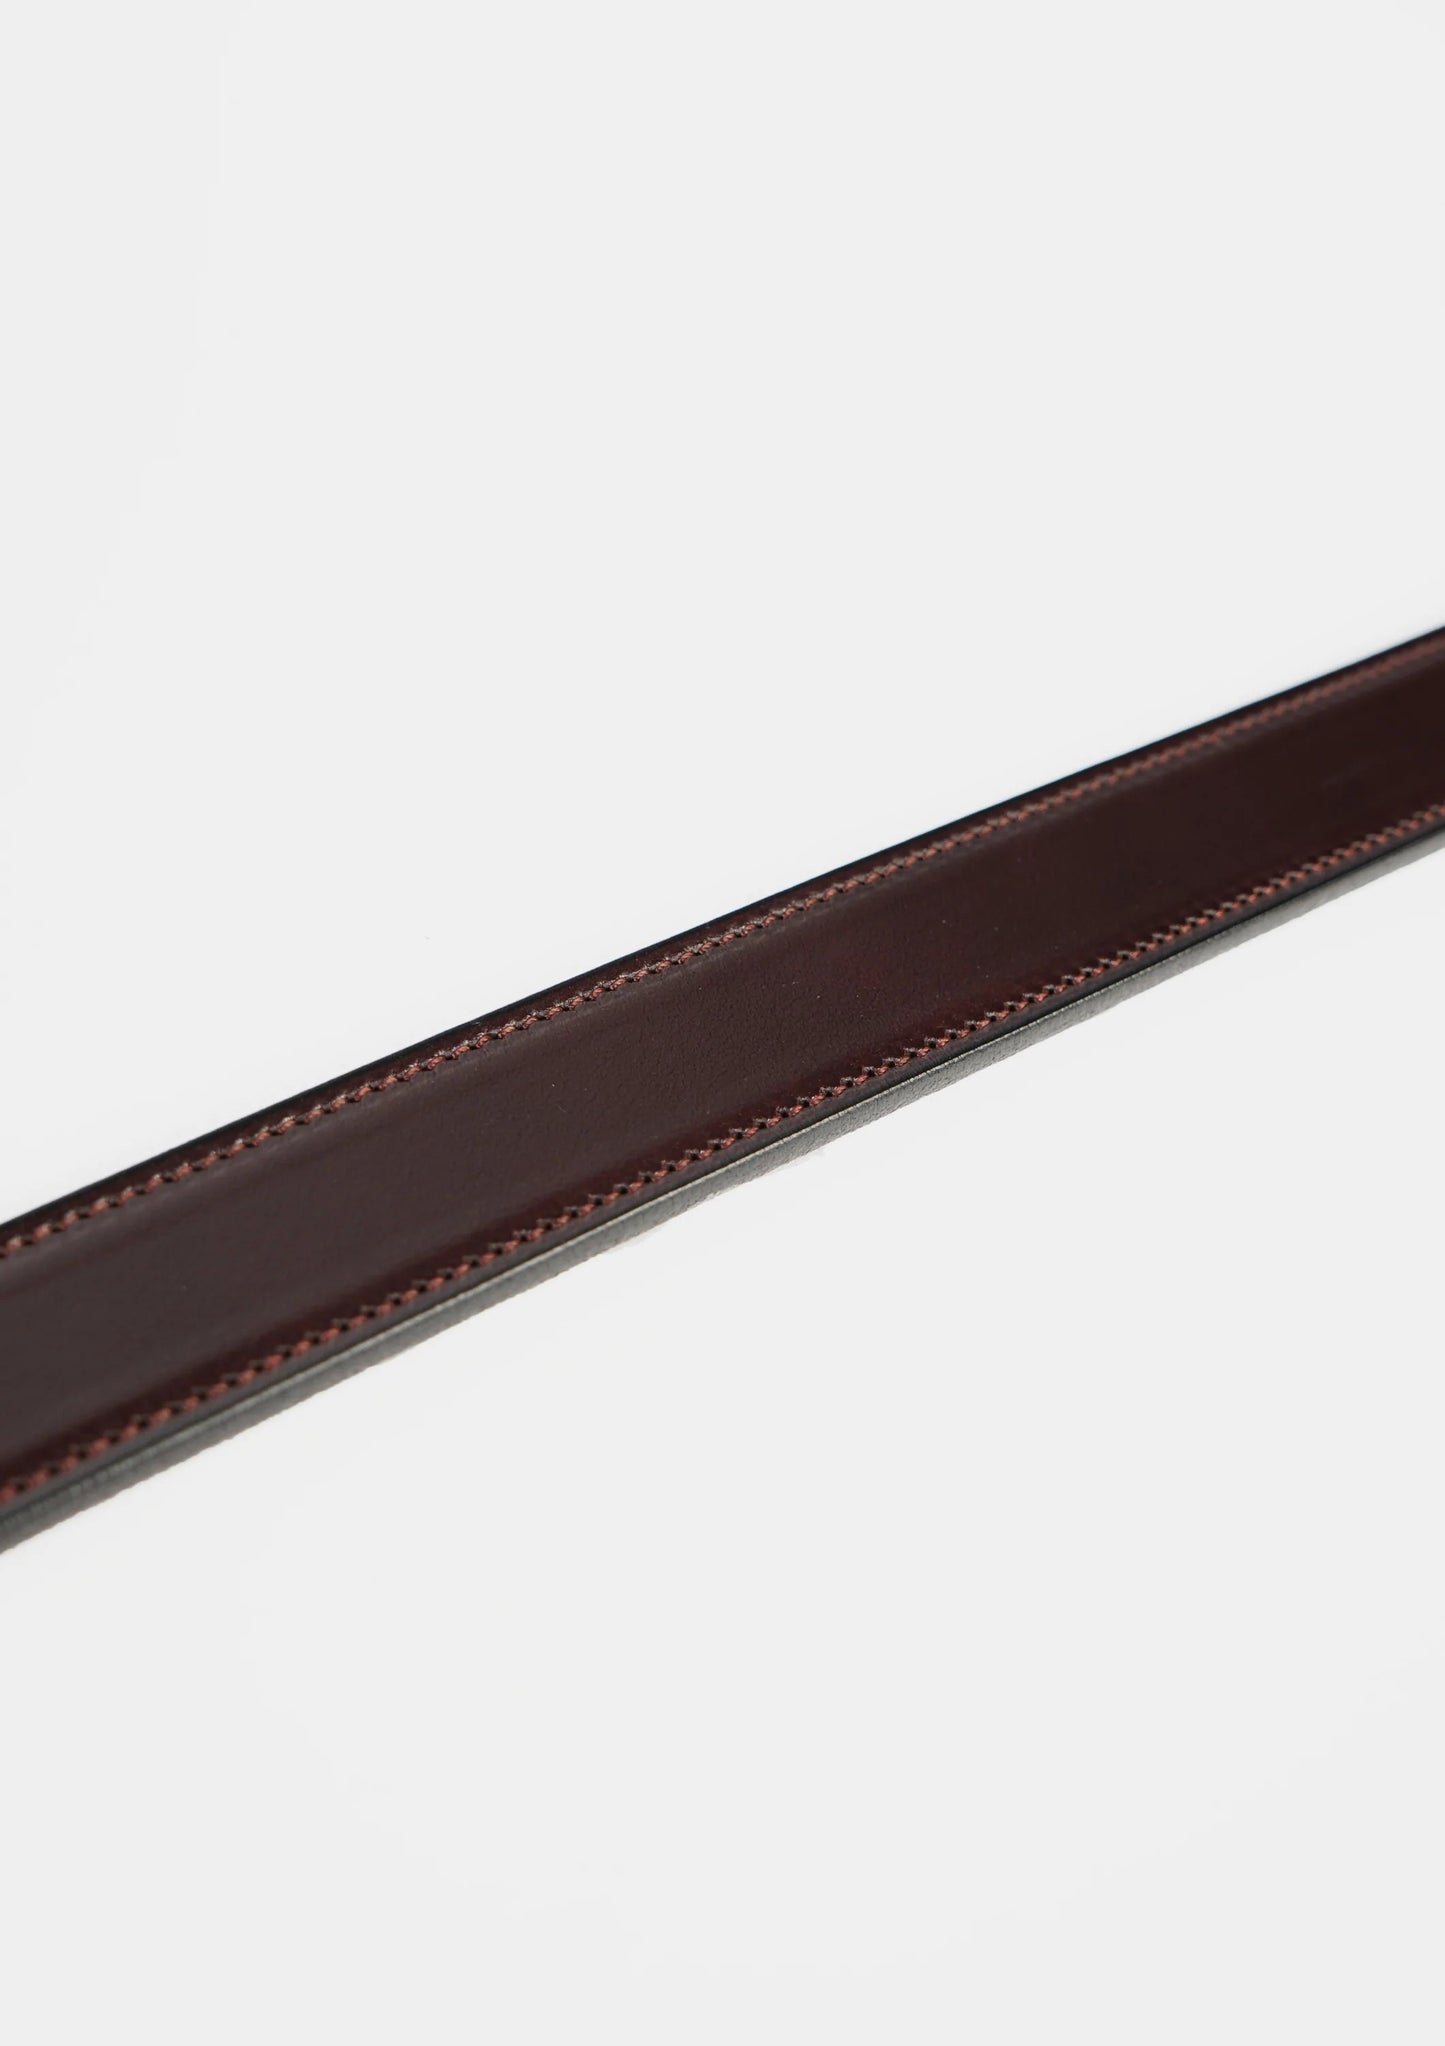 "TORY Leather" Leather Belt - Dark Brown